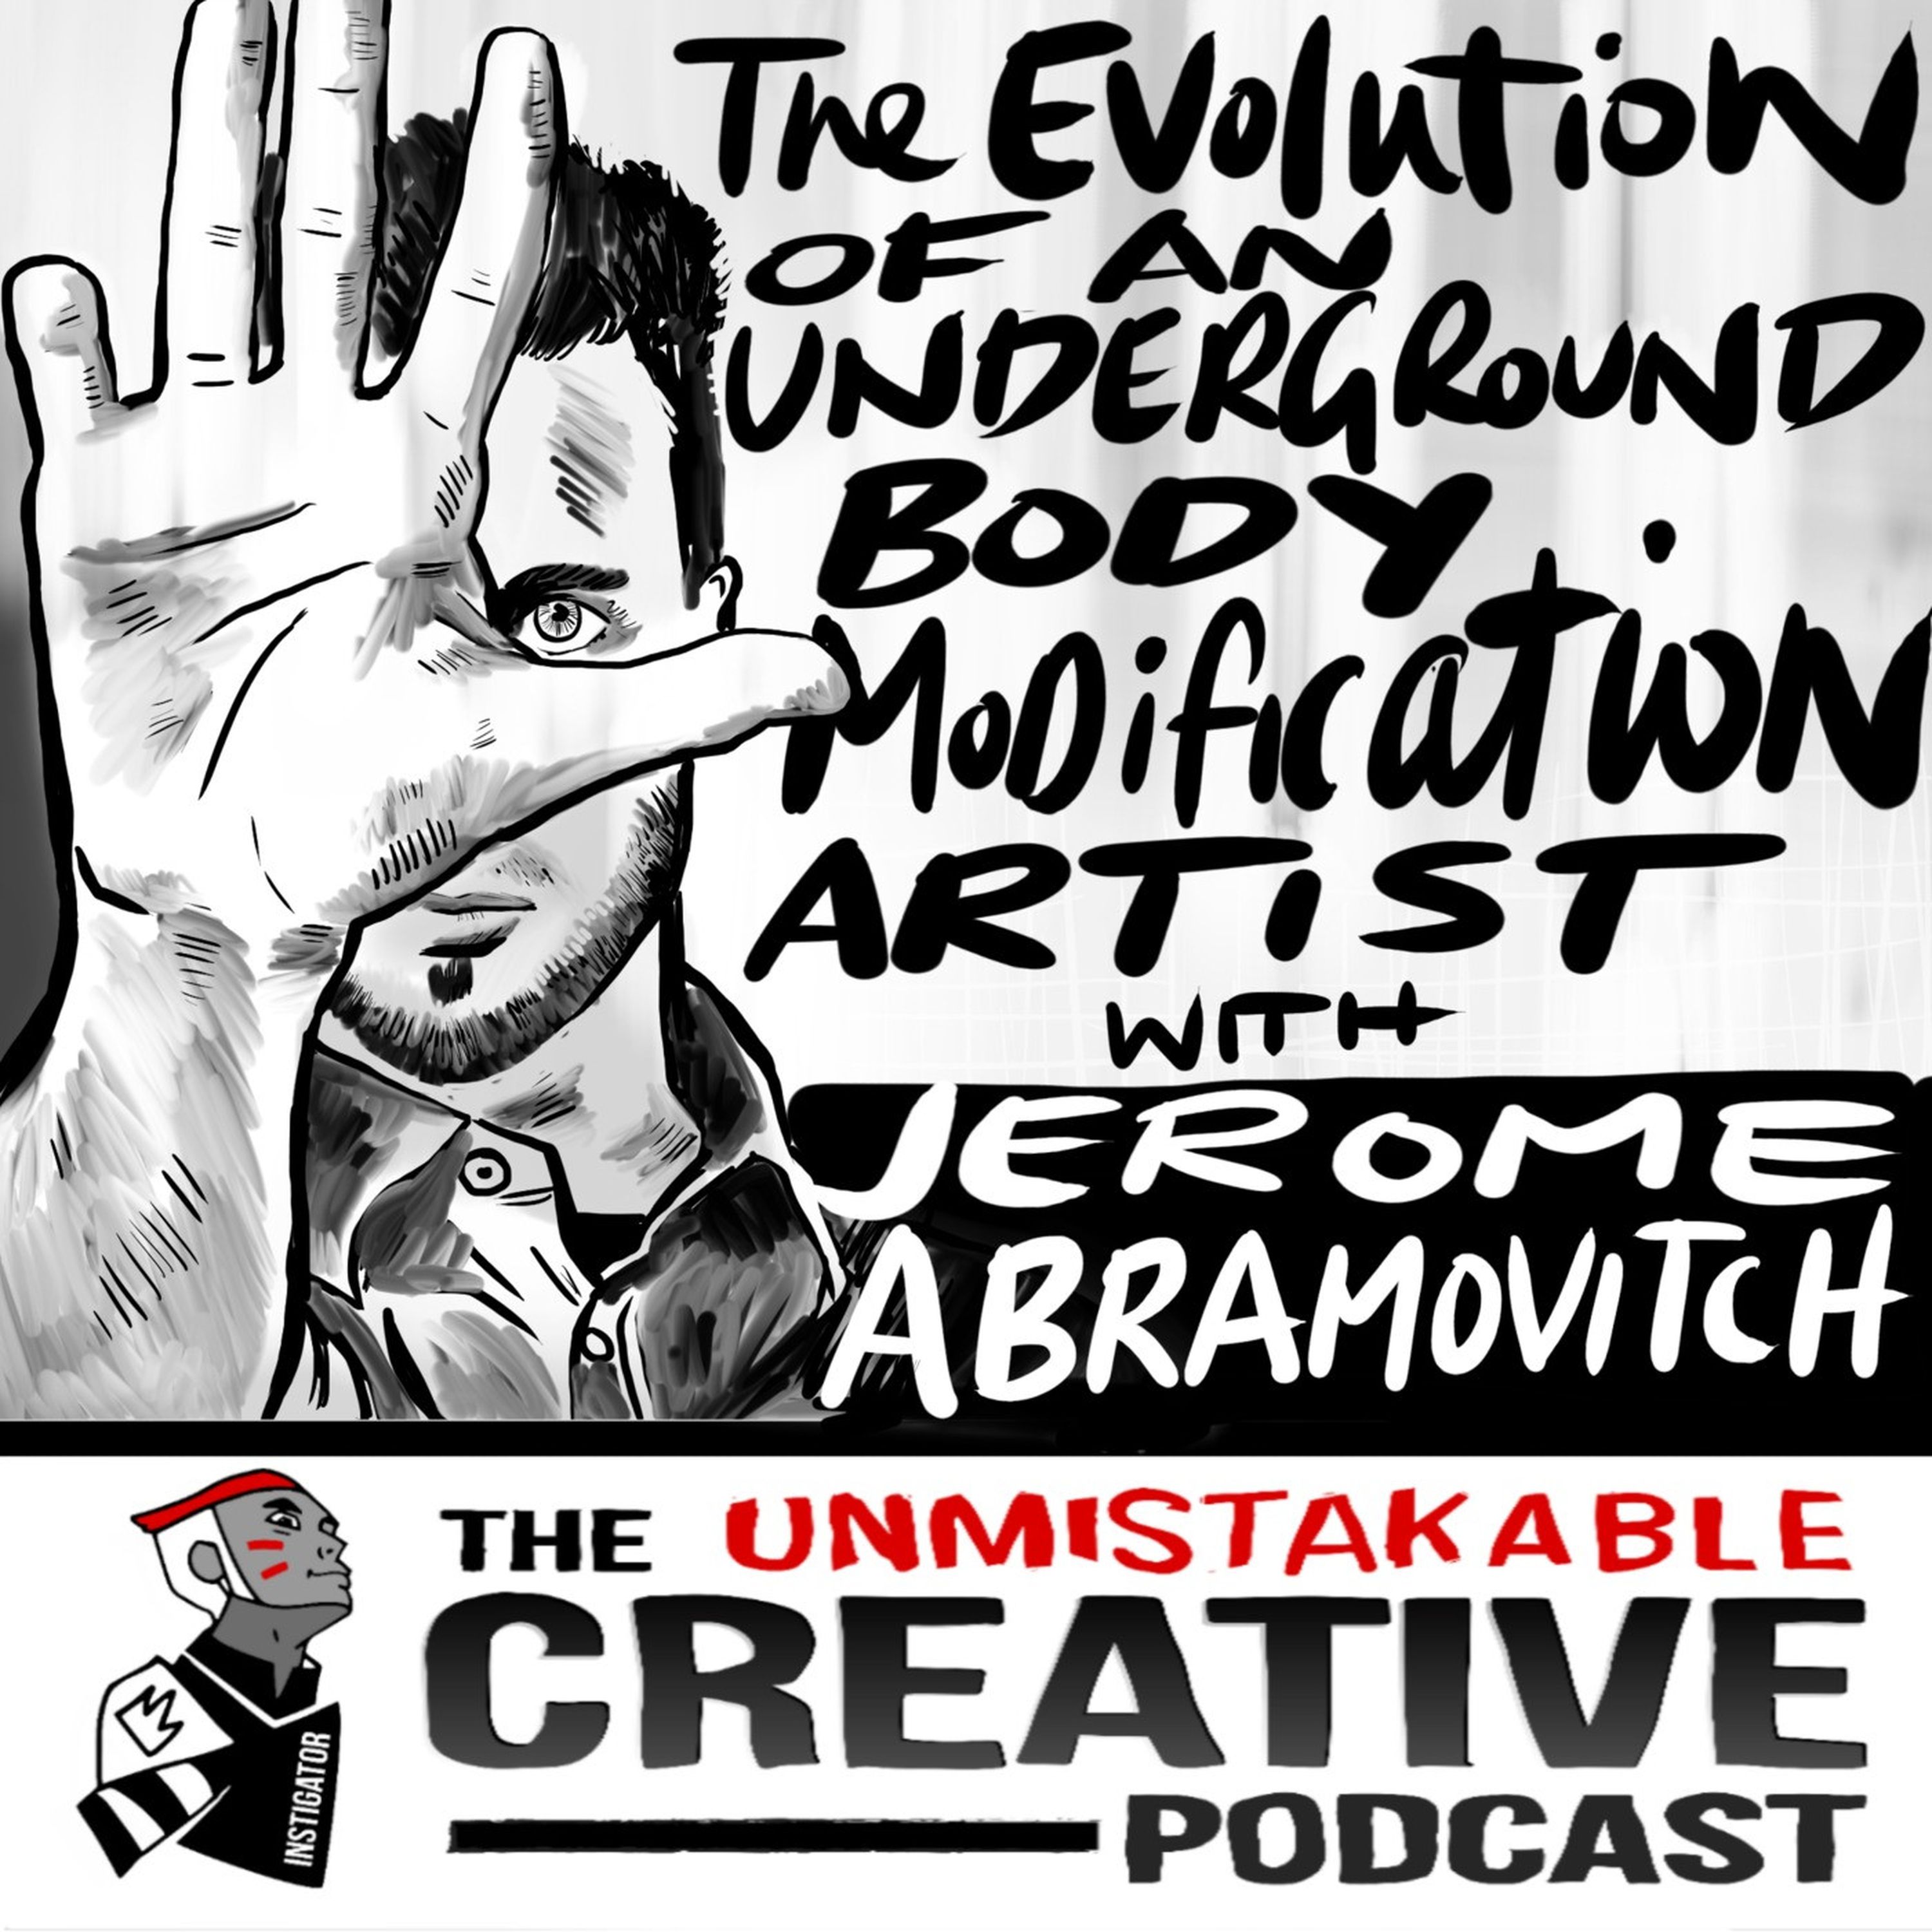 The Evolution of an Underground Body Modification Artist with Jerome Abramovitch Image